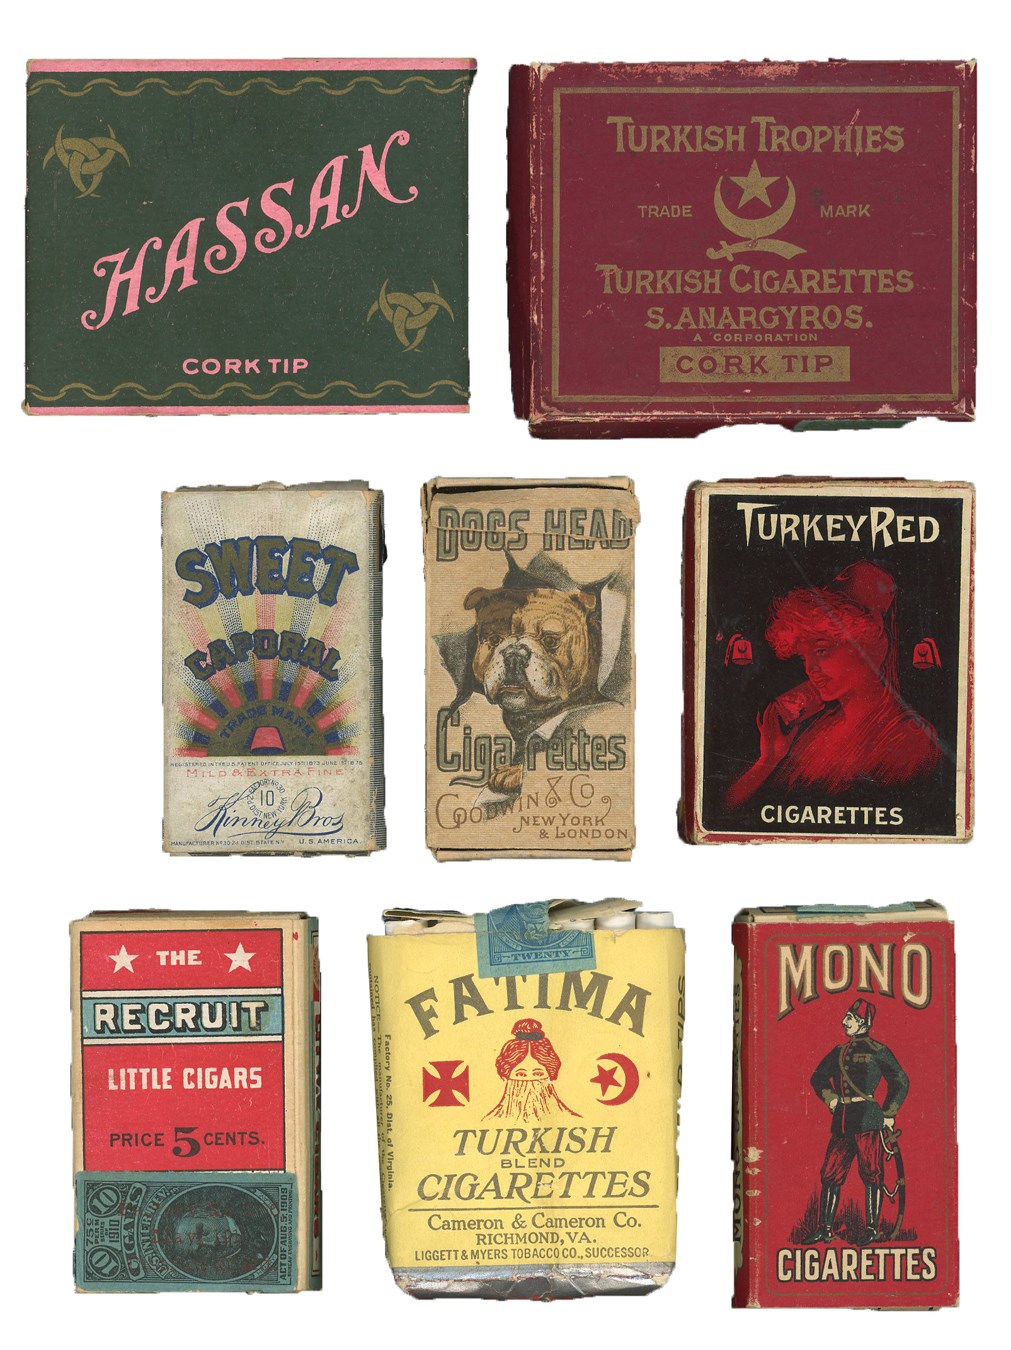 Baseball and Trading Cards - Tobacco Packages Associated with Baseball Cards (13)